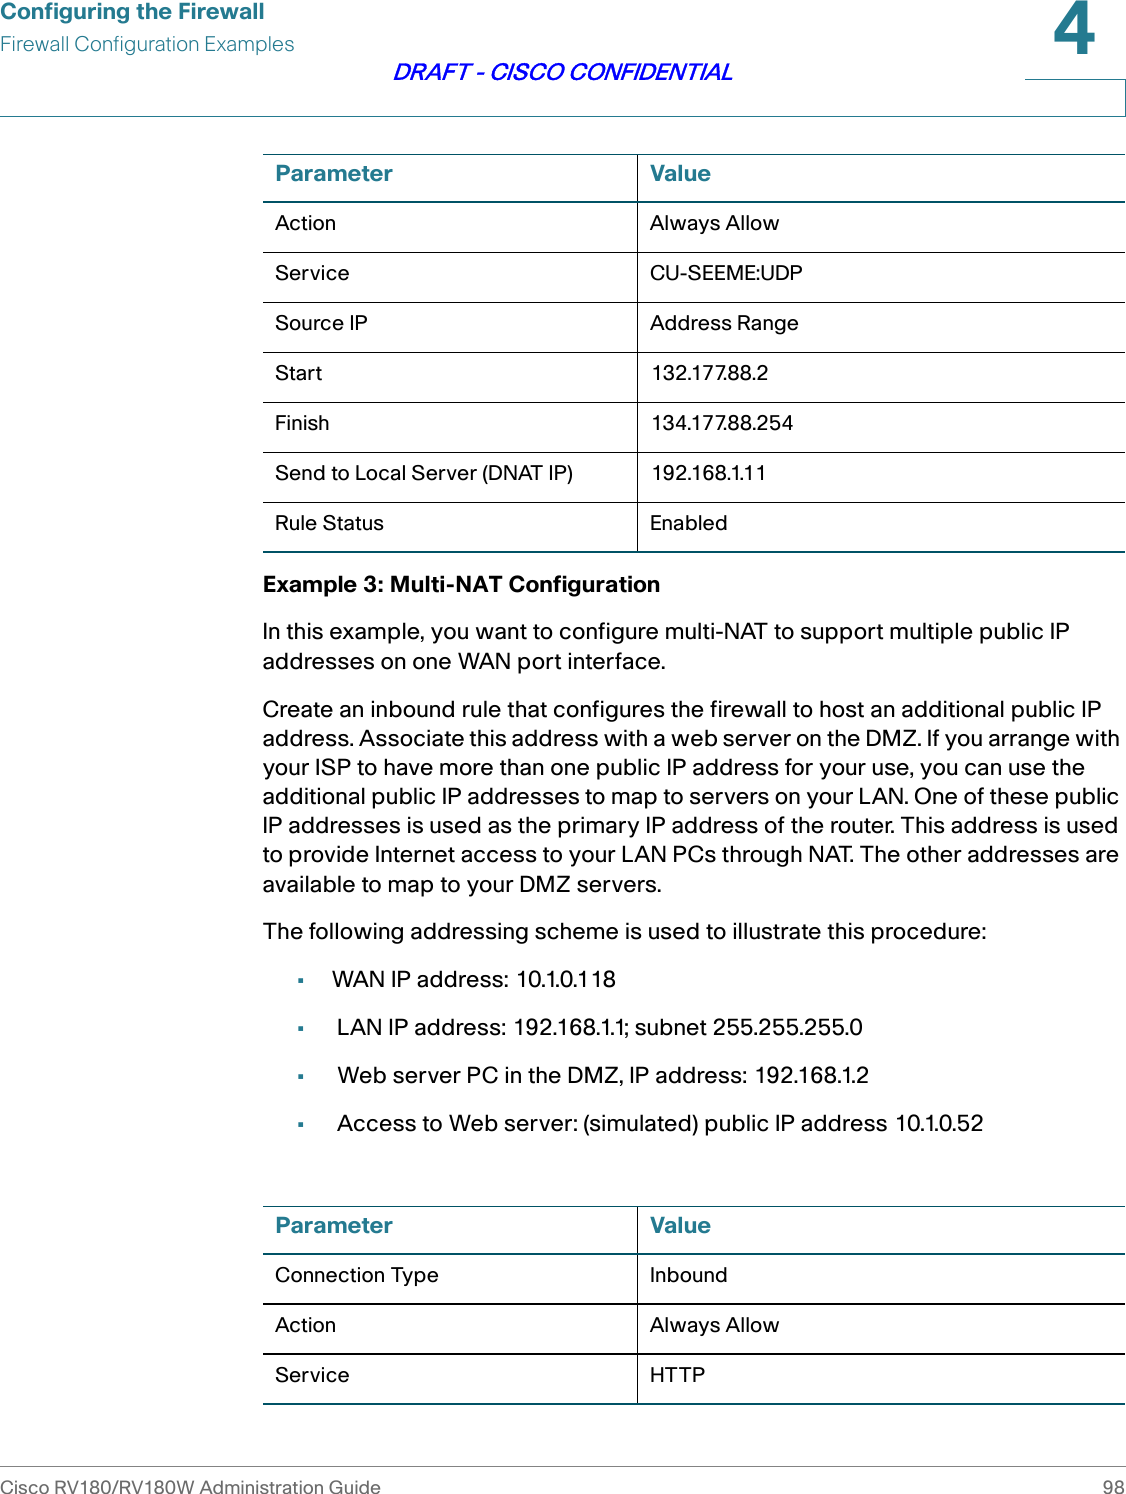 Configuring the FirewallFirewall Configuration ExamplesCisco RV180/RV180W Administration Guide 984DRAFT - CISCO CONFIDENTIALExample 3: Multi-NAT Configuration In this example, you want to configure multi-NAT to support multiple public IP addresses on one WAN port interface.Create an inbound rule that configures the firewall to host an additional public IP address. Associate this address with a web server on the DMZ. If you arrange with your ISP to have more than one public IP address for your use, you can use the additional public IP addresses to map to servers on your LAN. One of these public IP addresses is used as the primary IP address of the router. This address is used to provide Internet access to your LAN PCs through NAT. The other addresses are available to map to your DMZ servers.The following addressing scheme is used to illustrate this procedure:•WAN IP addre ss: 10.1.0.118• LAN IP address: 192.168.1.1; subnet 255.255.255.0• Web server PC in the DMZ, IP address: 192.168.1.2• Access to Web server: (simulated) public IP address 10.1.0.52Action Always AllowService CU-SEEME:UDPSource IP Address RangeStart 132.177.88.2Finish 134.177.88.254Send to Local Server (DNAT IP) 192.168.1.11Rule Status EnabledParameter ValueParameter ValueConnection Type InboundAction Always AllowService HTTP